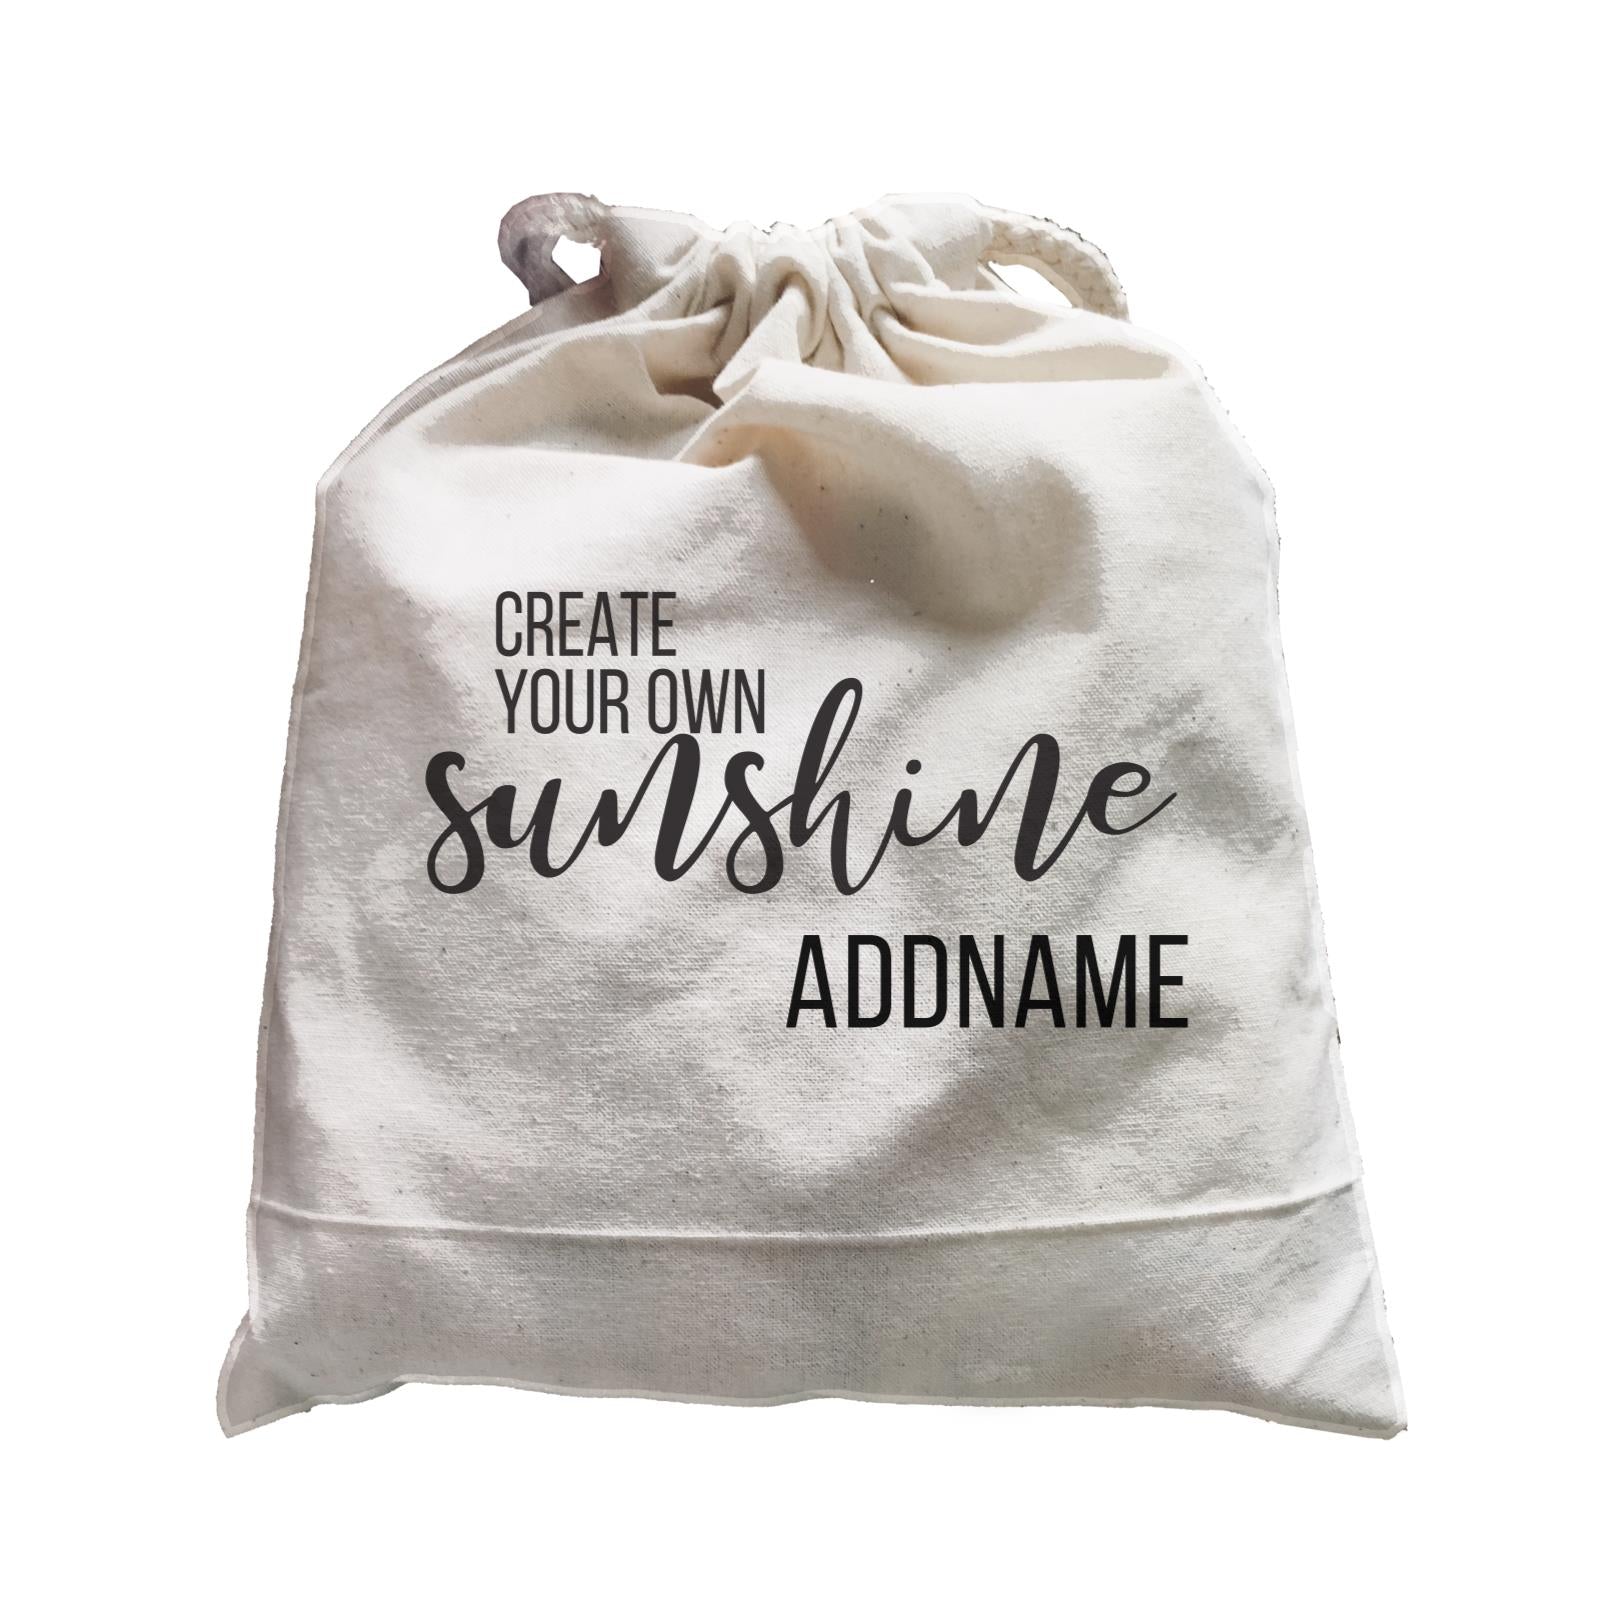 Inspiration Quotes Create Your Own Sunshine Addname Satchel